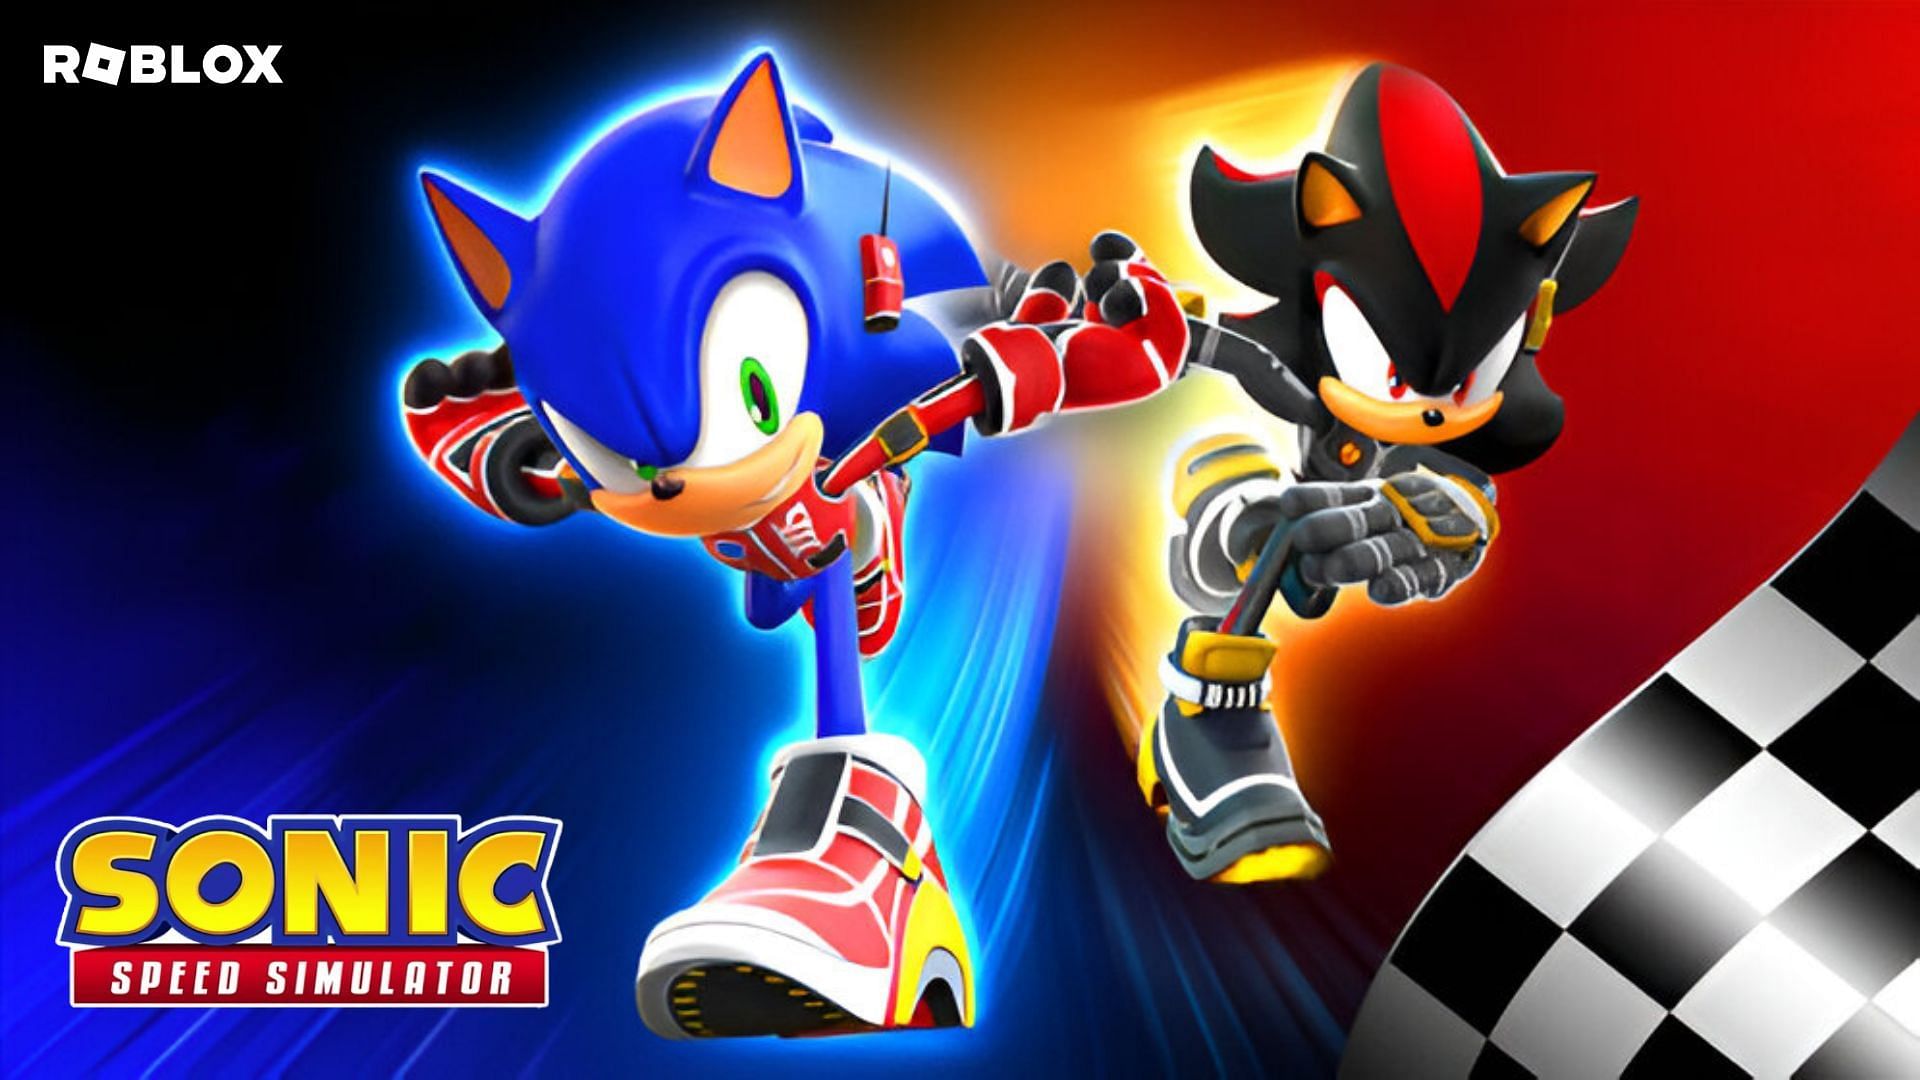 Your guide to greatness in Sonic Speed Simulator (Image via Roblox and Sportskeeda)